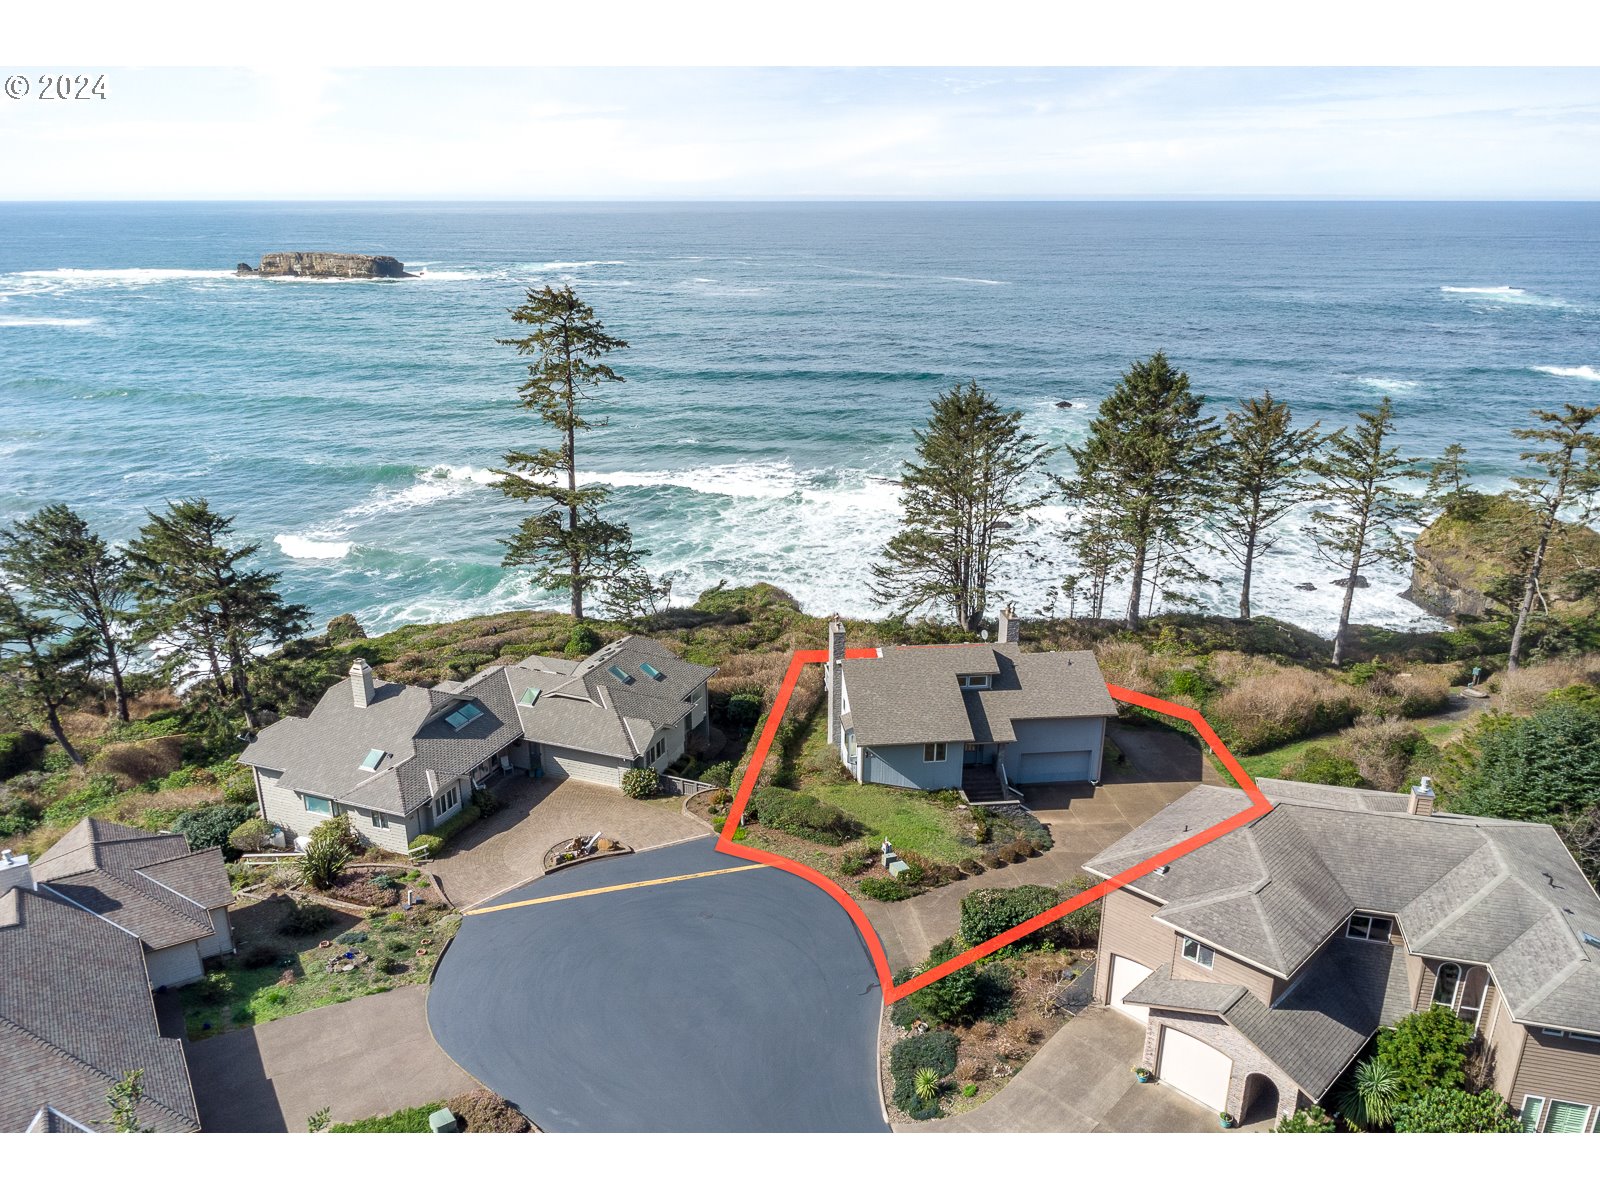 242 SEA CREST WAY, Otter Rock, OR 97369